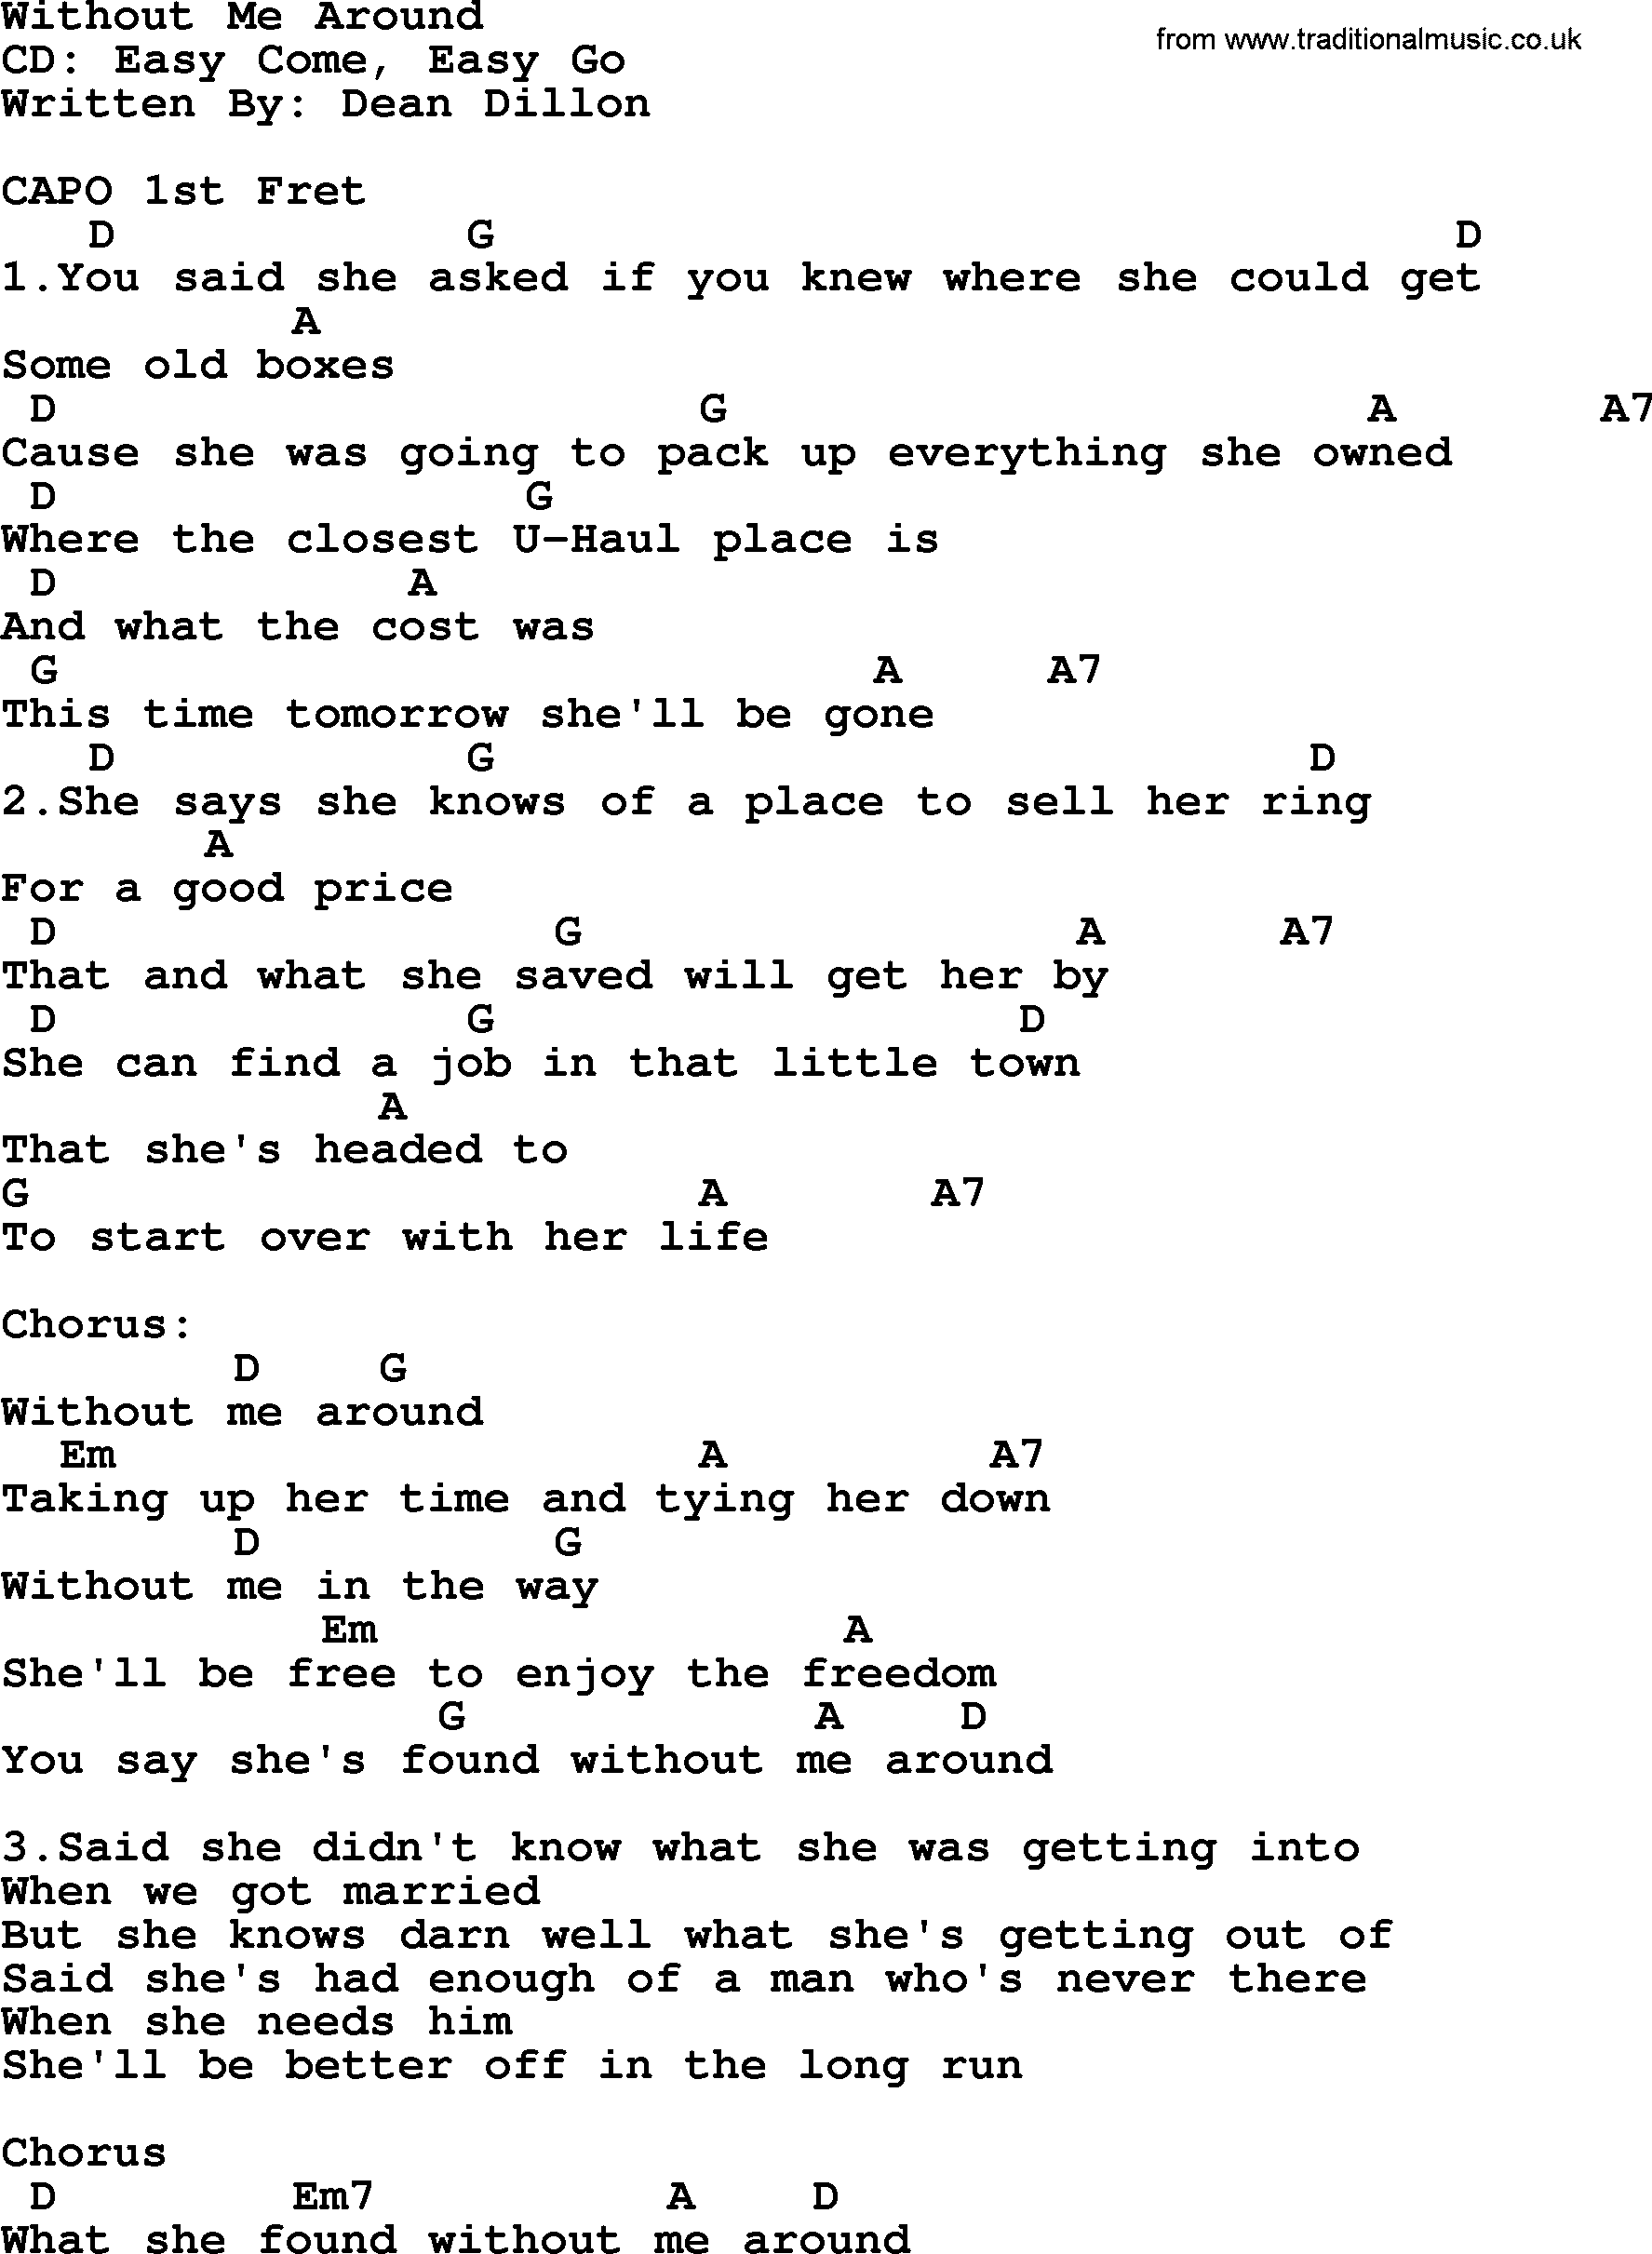 George Strait song: Without Me Around, lyrics and chords